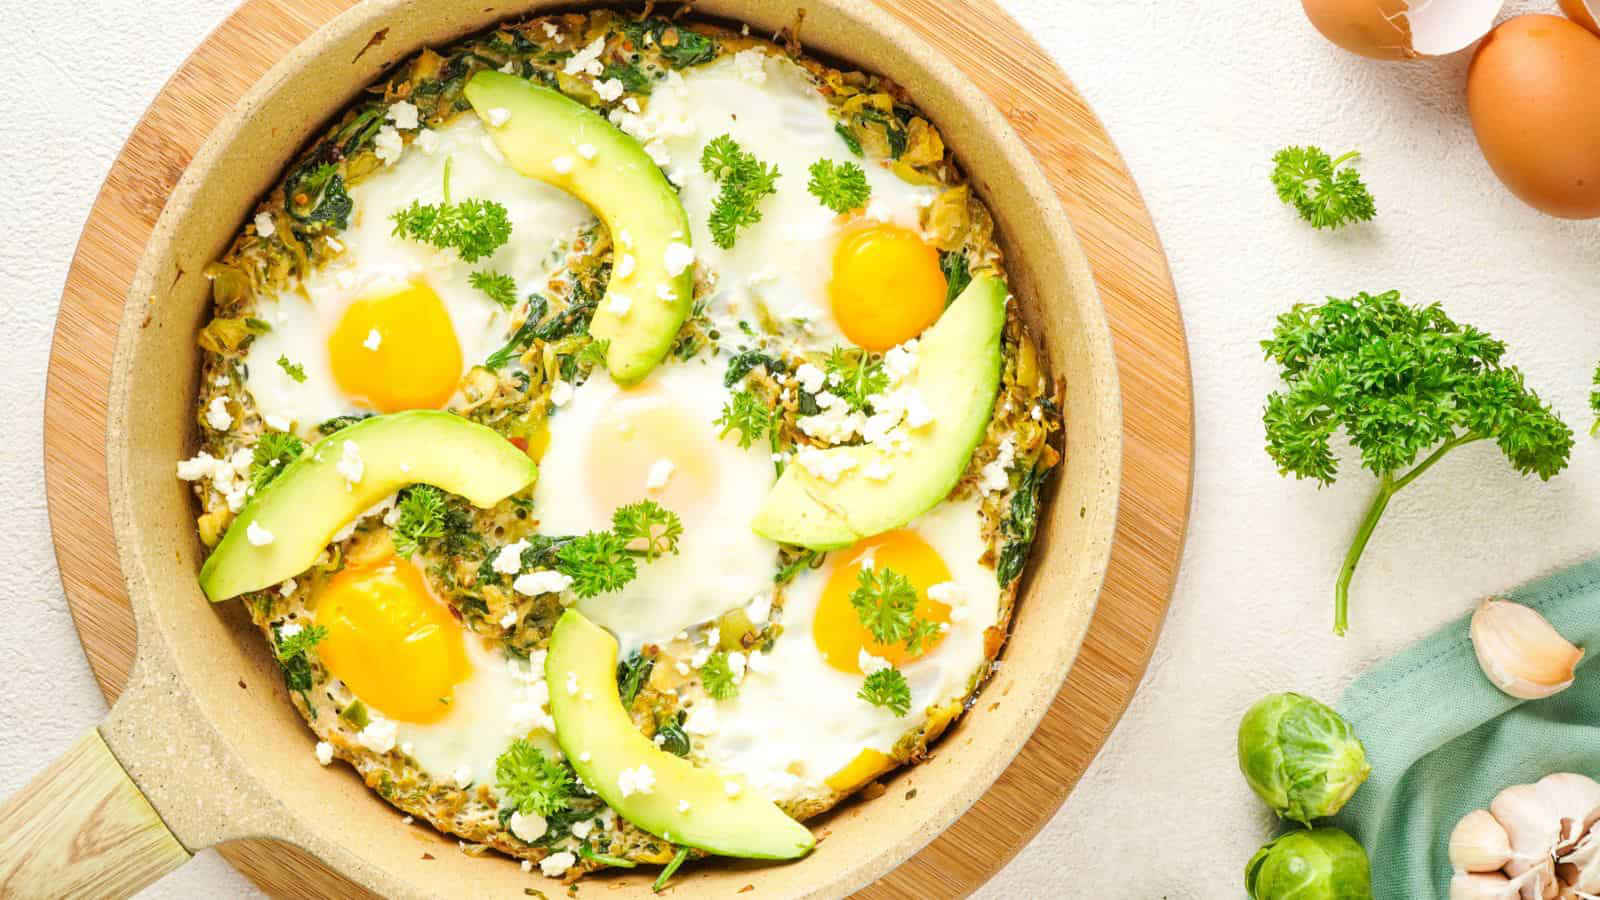 Ditch The Cereal: 12 Egg-Cellent Recipes Beyond Breakfast!